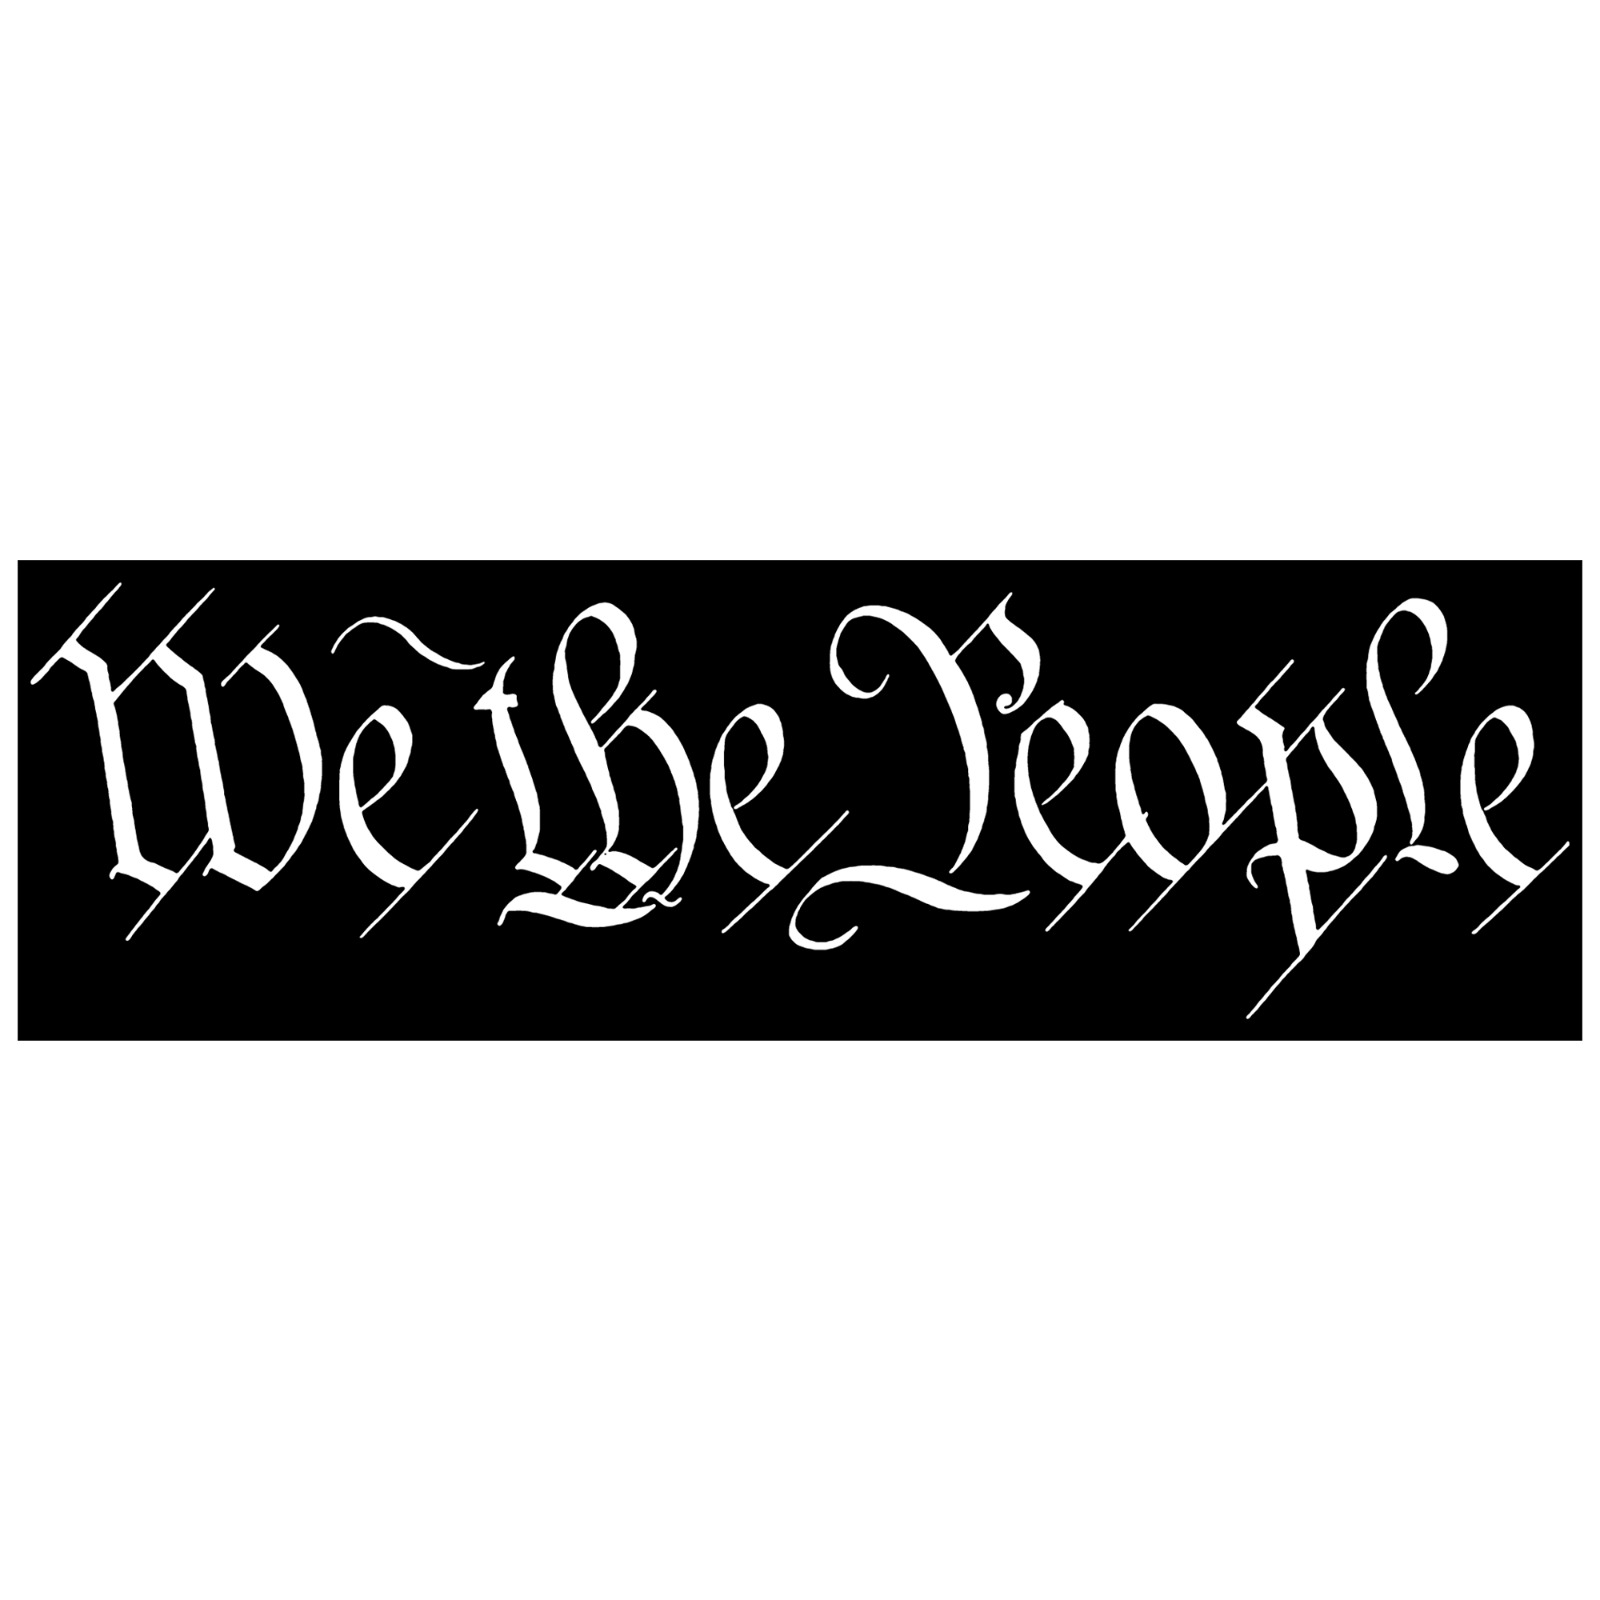 We The People Constitution America Sticker 5x1.5 Inch Bumper Laptop Decal 